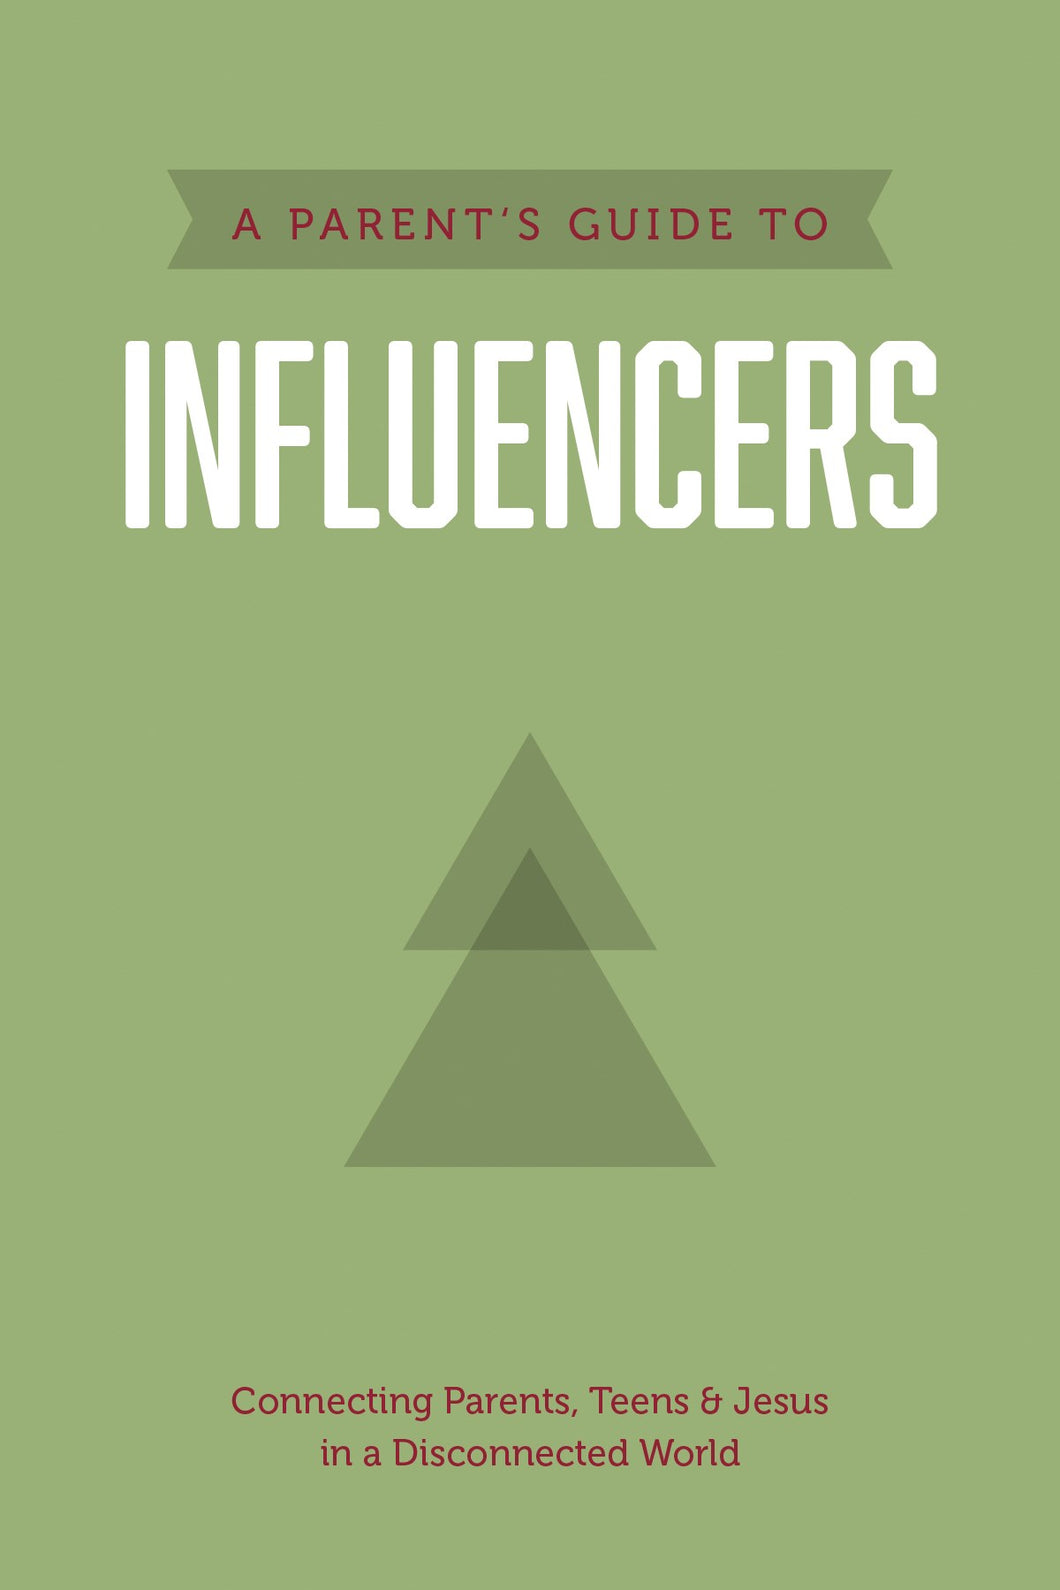 A Parent's Guide To Influencers (Axis)